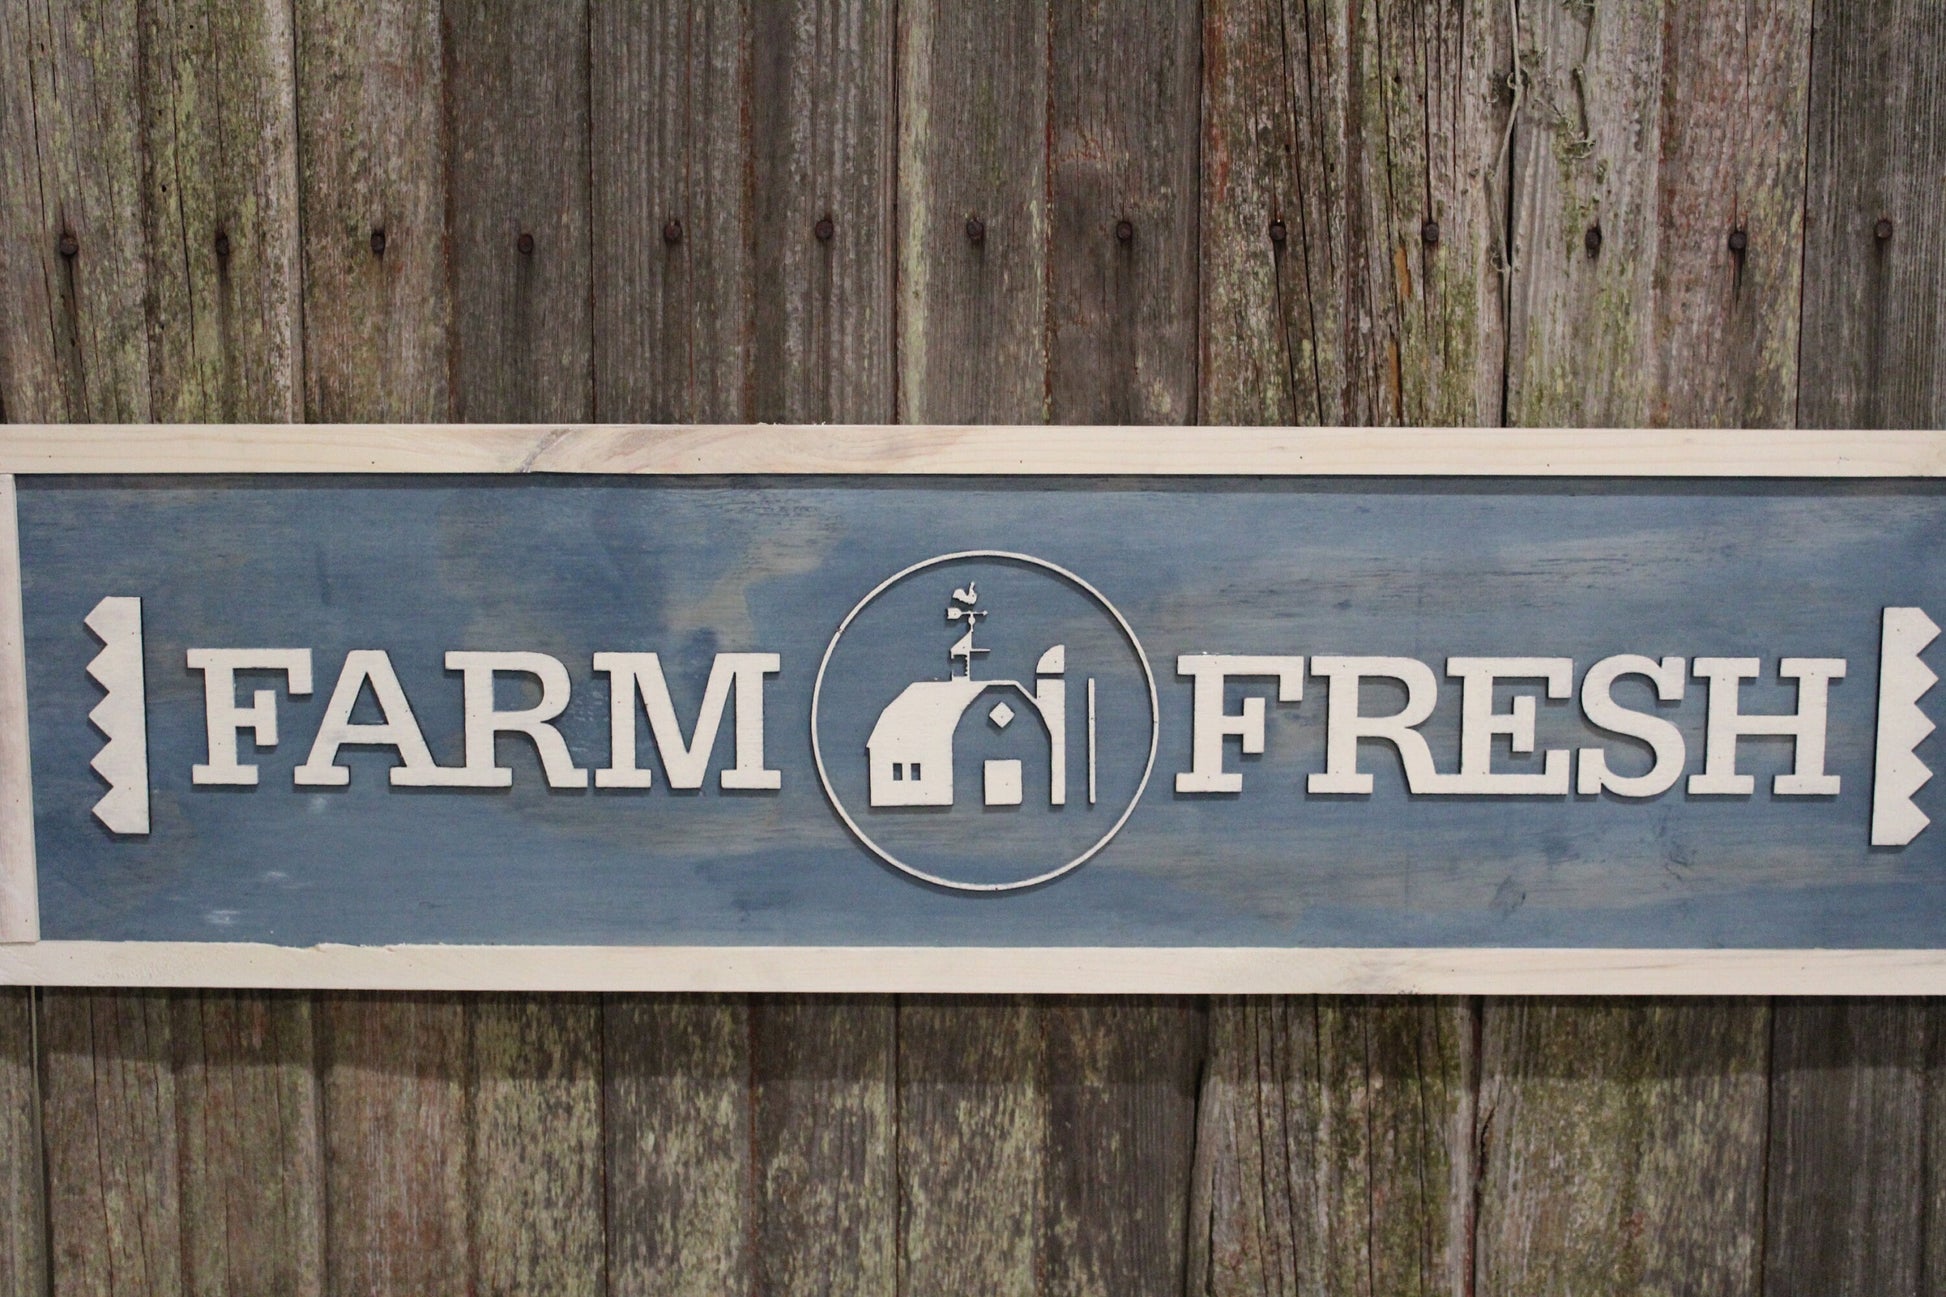 Farm Fresh Wood Sign Raised Text Barn Market Adverting Organic Small Shop Sign 3D White Washed Rustic Primitive Wall Décor Wall Art